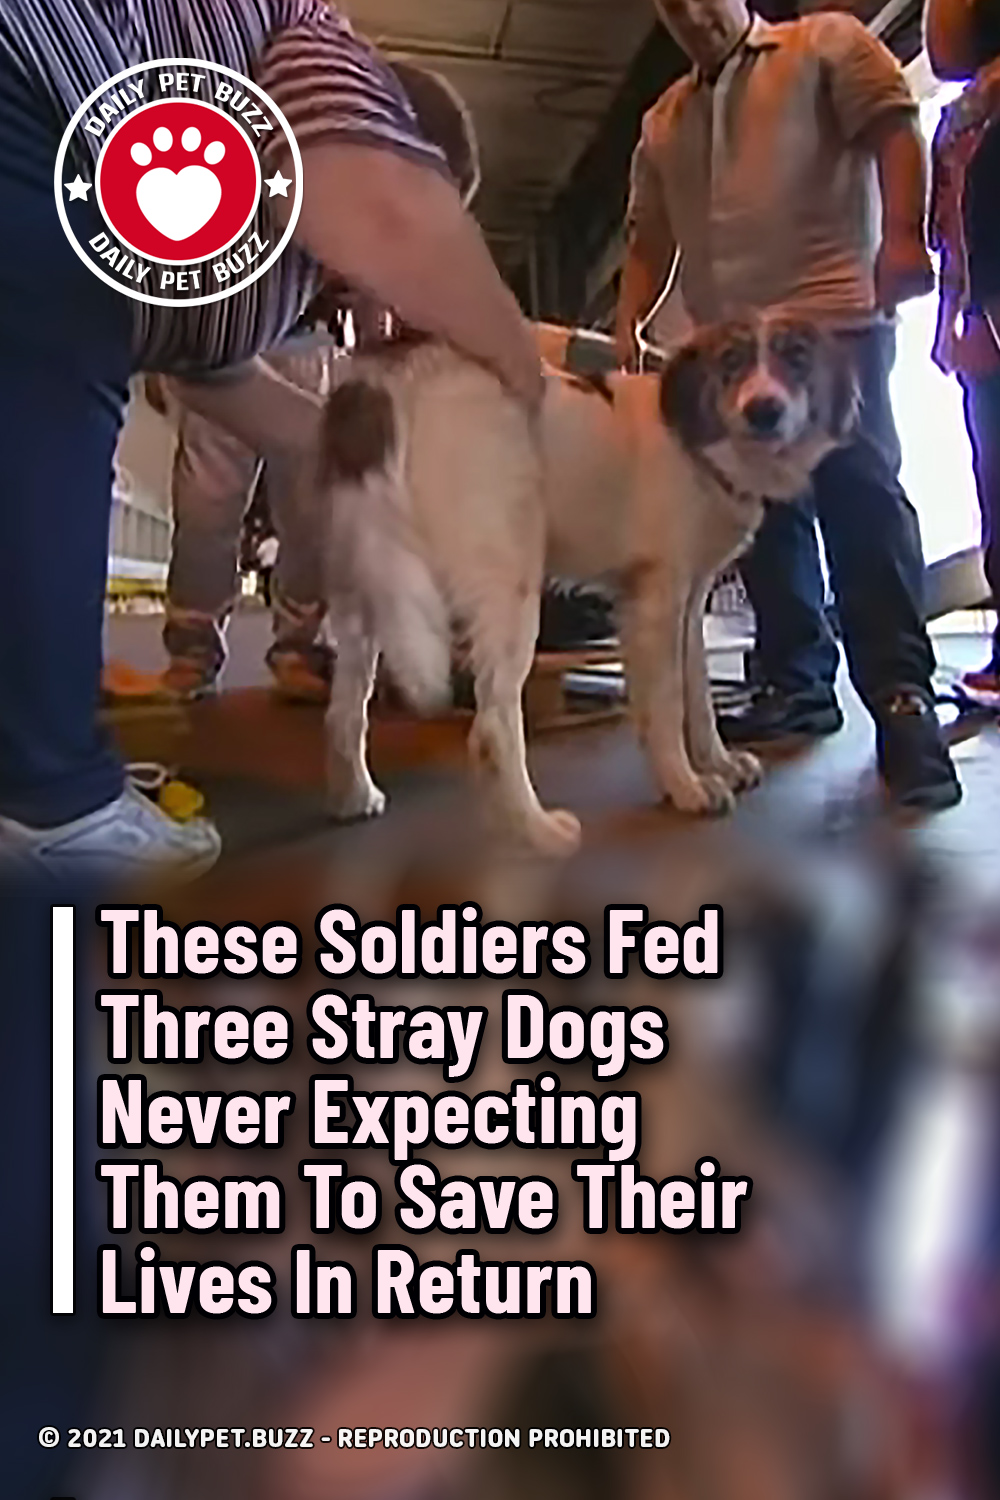 These Soldiers Fed Three Stray Dogs Never Expecting Them To Save Their Lives In Return